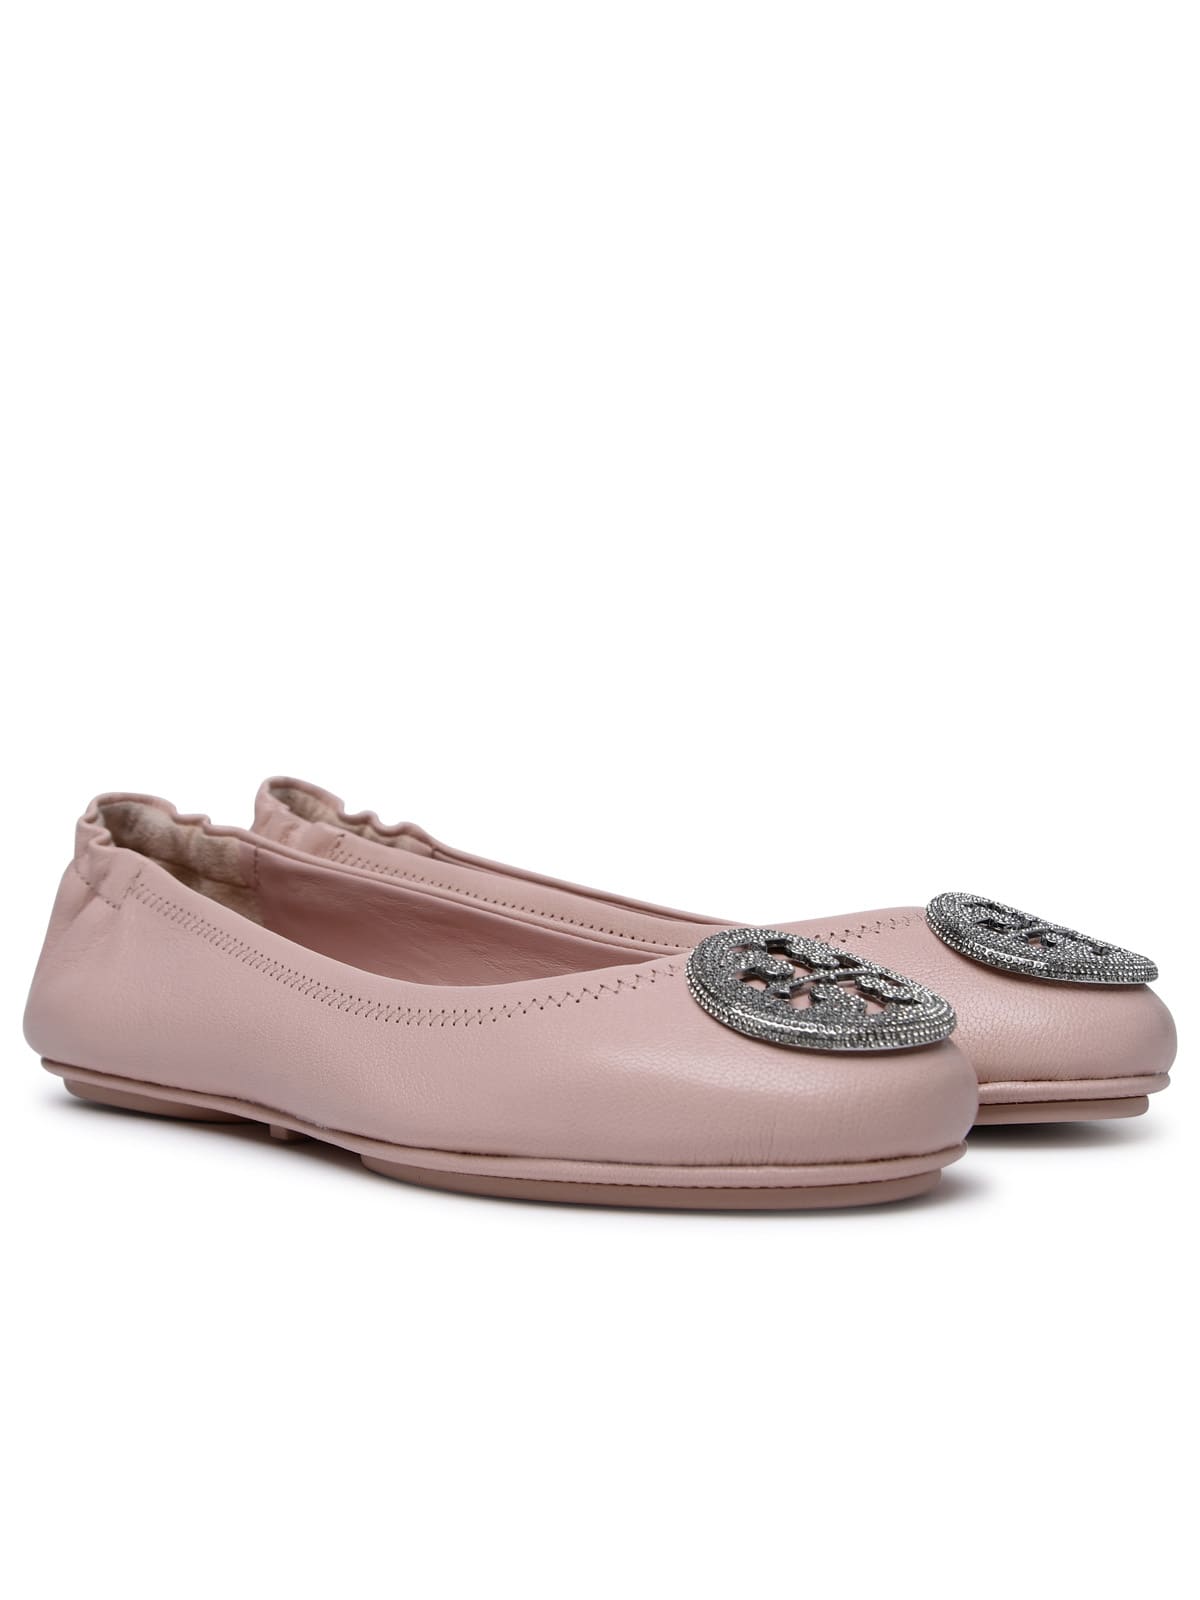 Shop Tory Burch Minnie Travel Pink Leather Ballet Flats